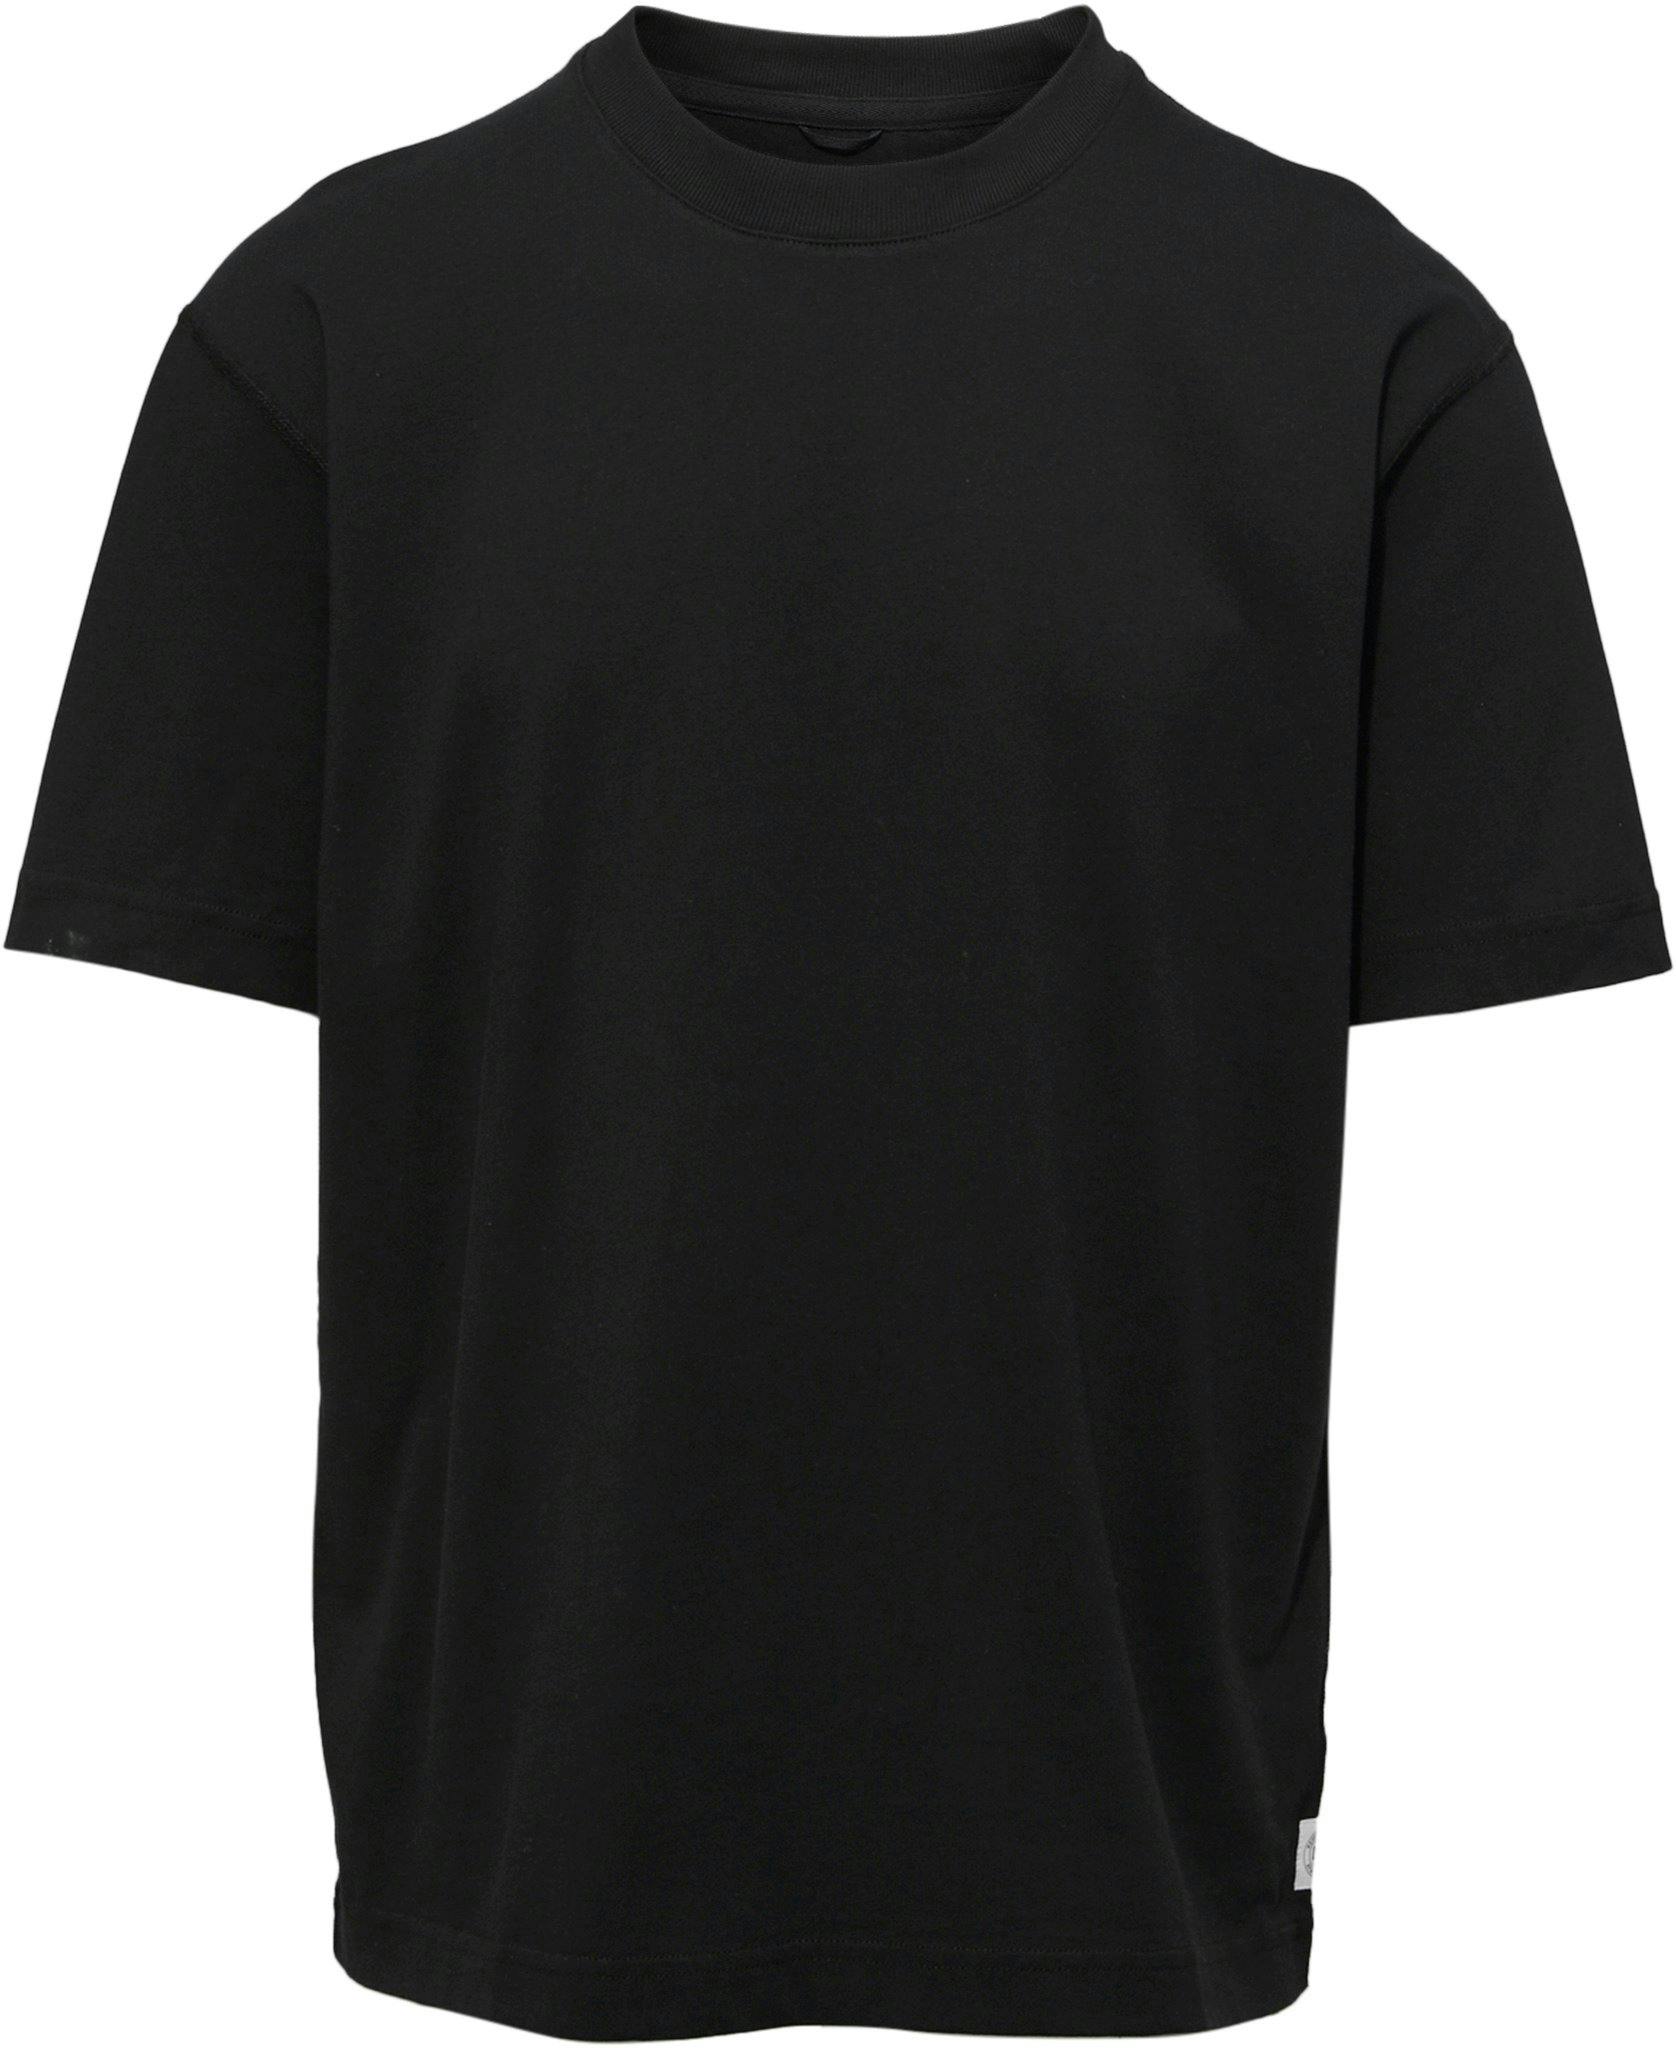 Product image for Midweight Jersey T-Shirt - Men's